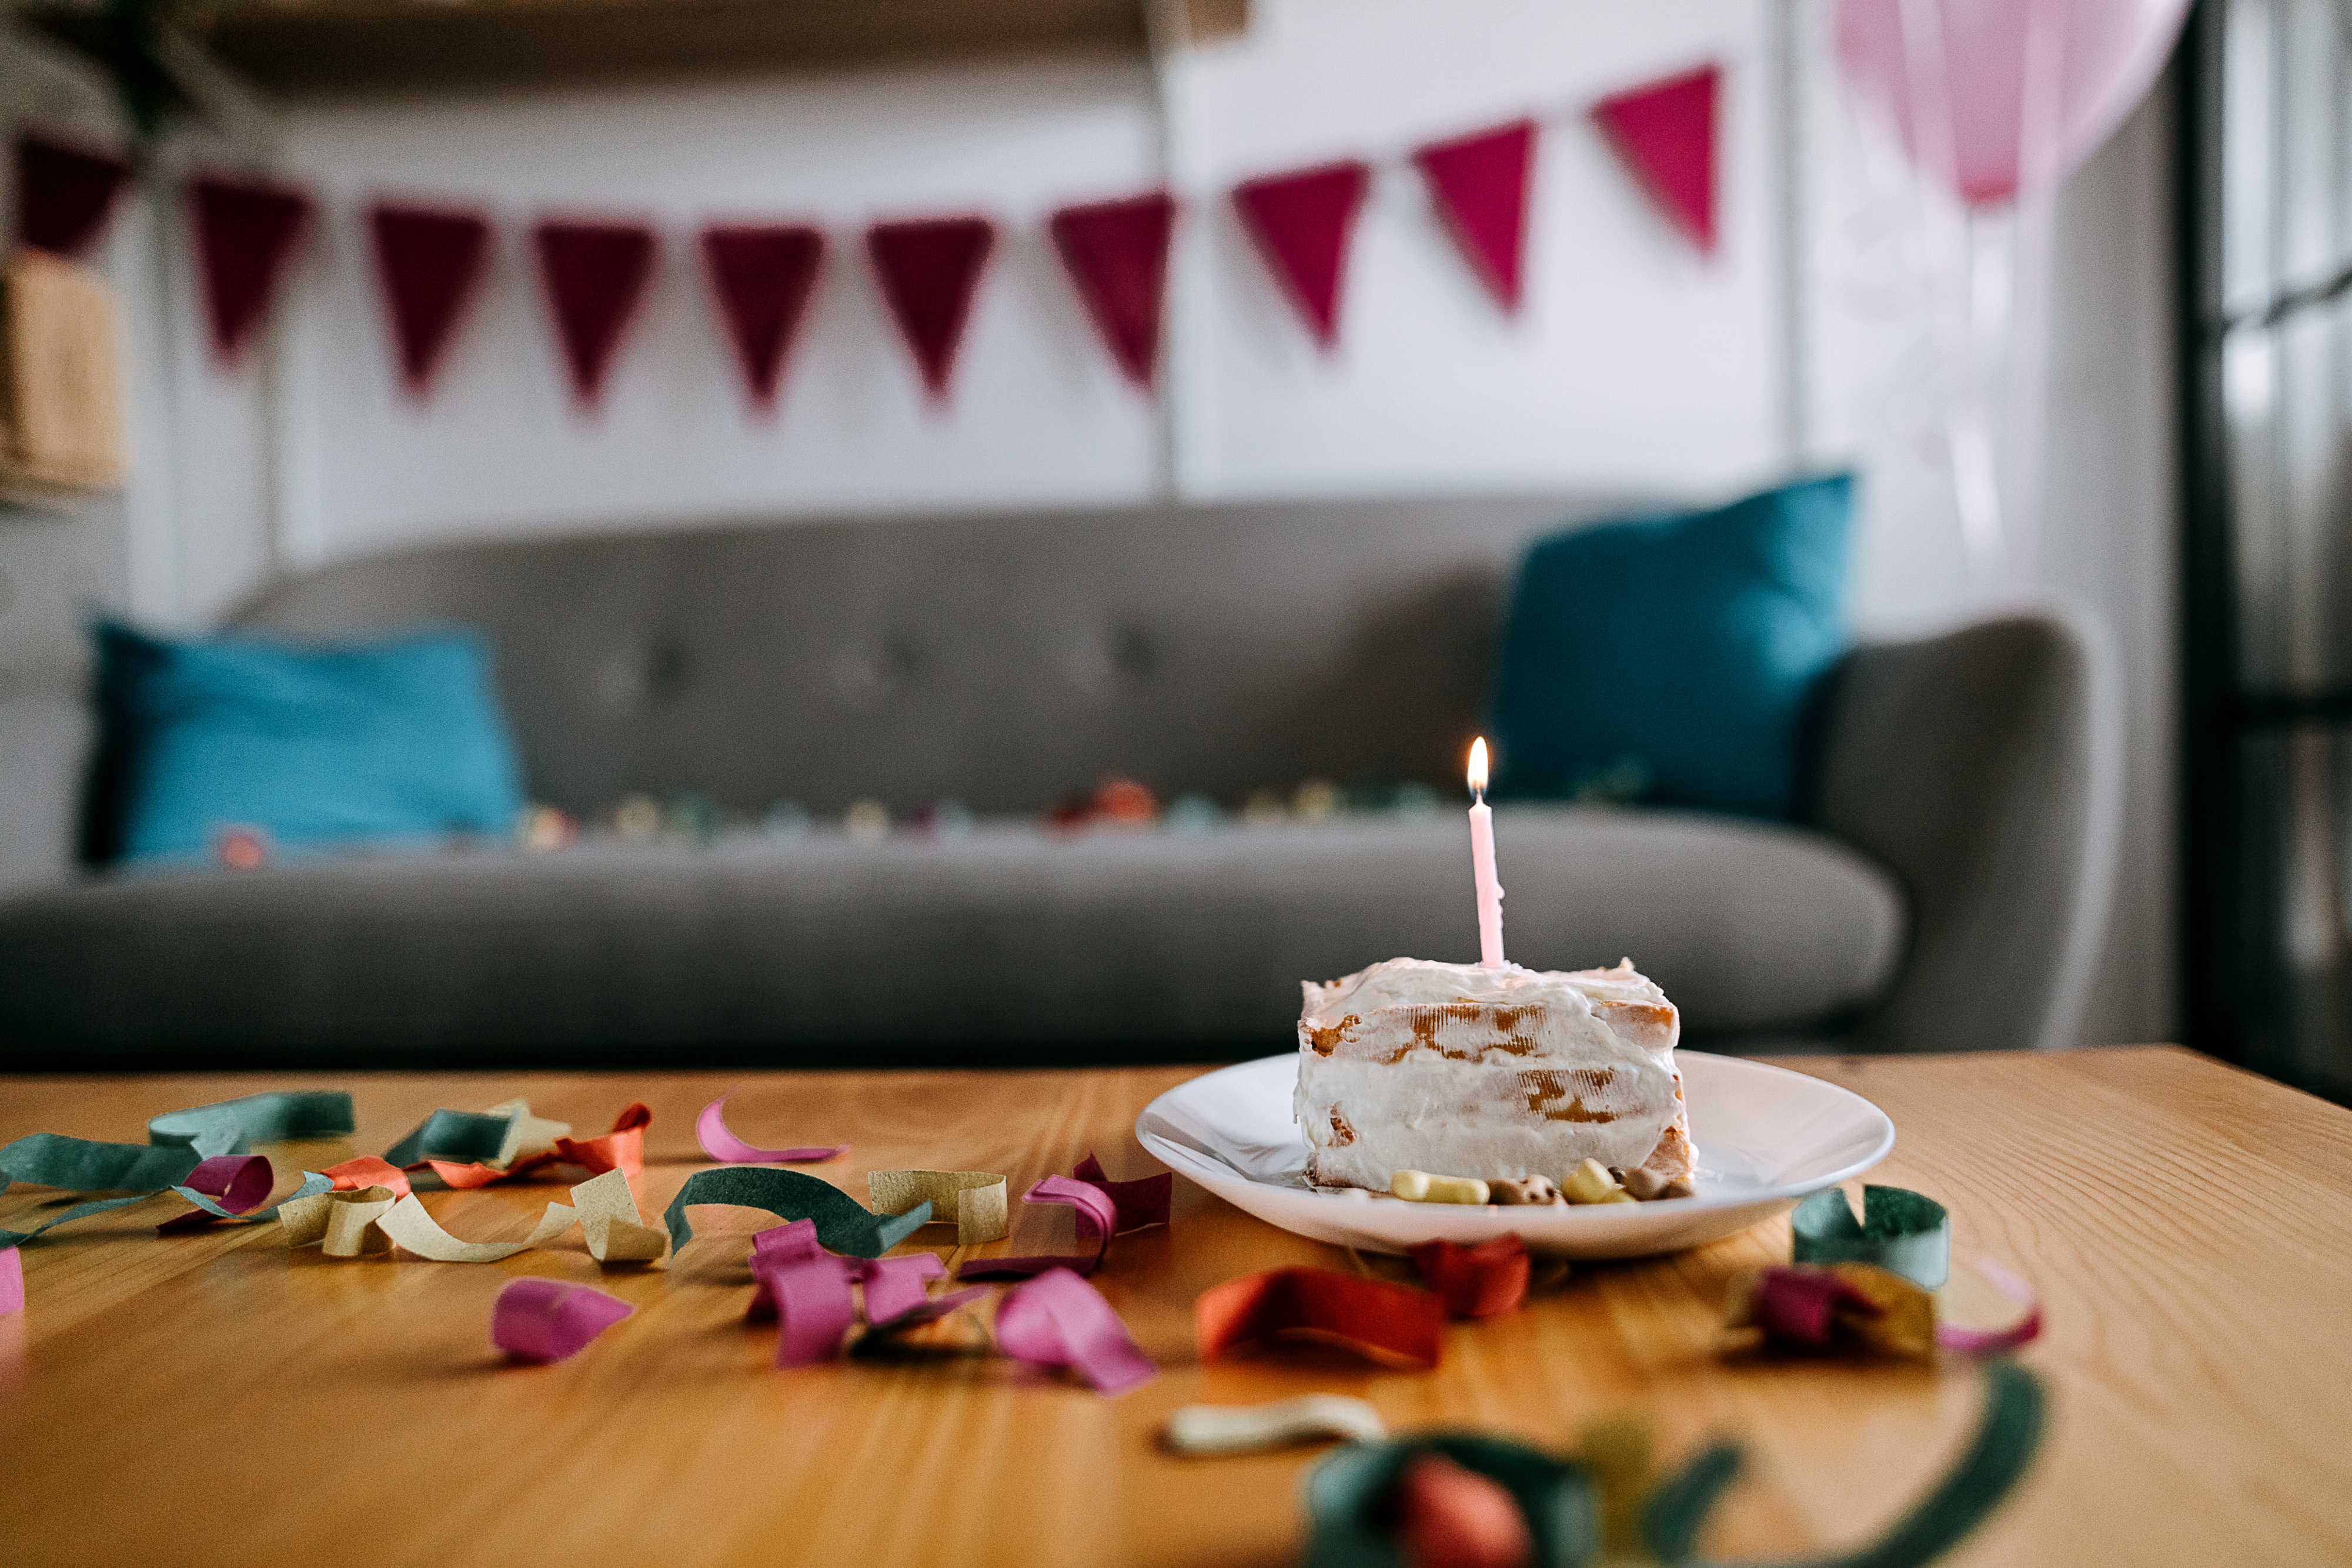 Slice of cake with a lit candle on a table, surrounded by colorful confetti, with a couch and party decorations in the background